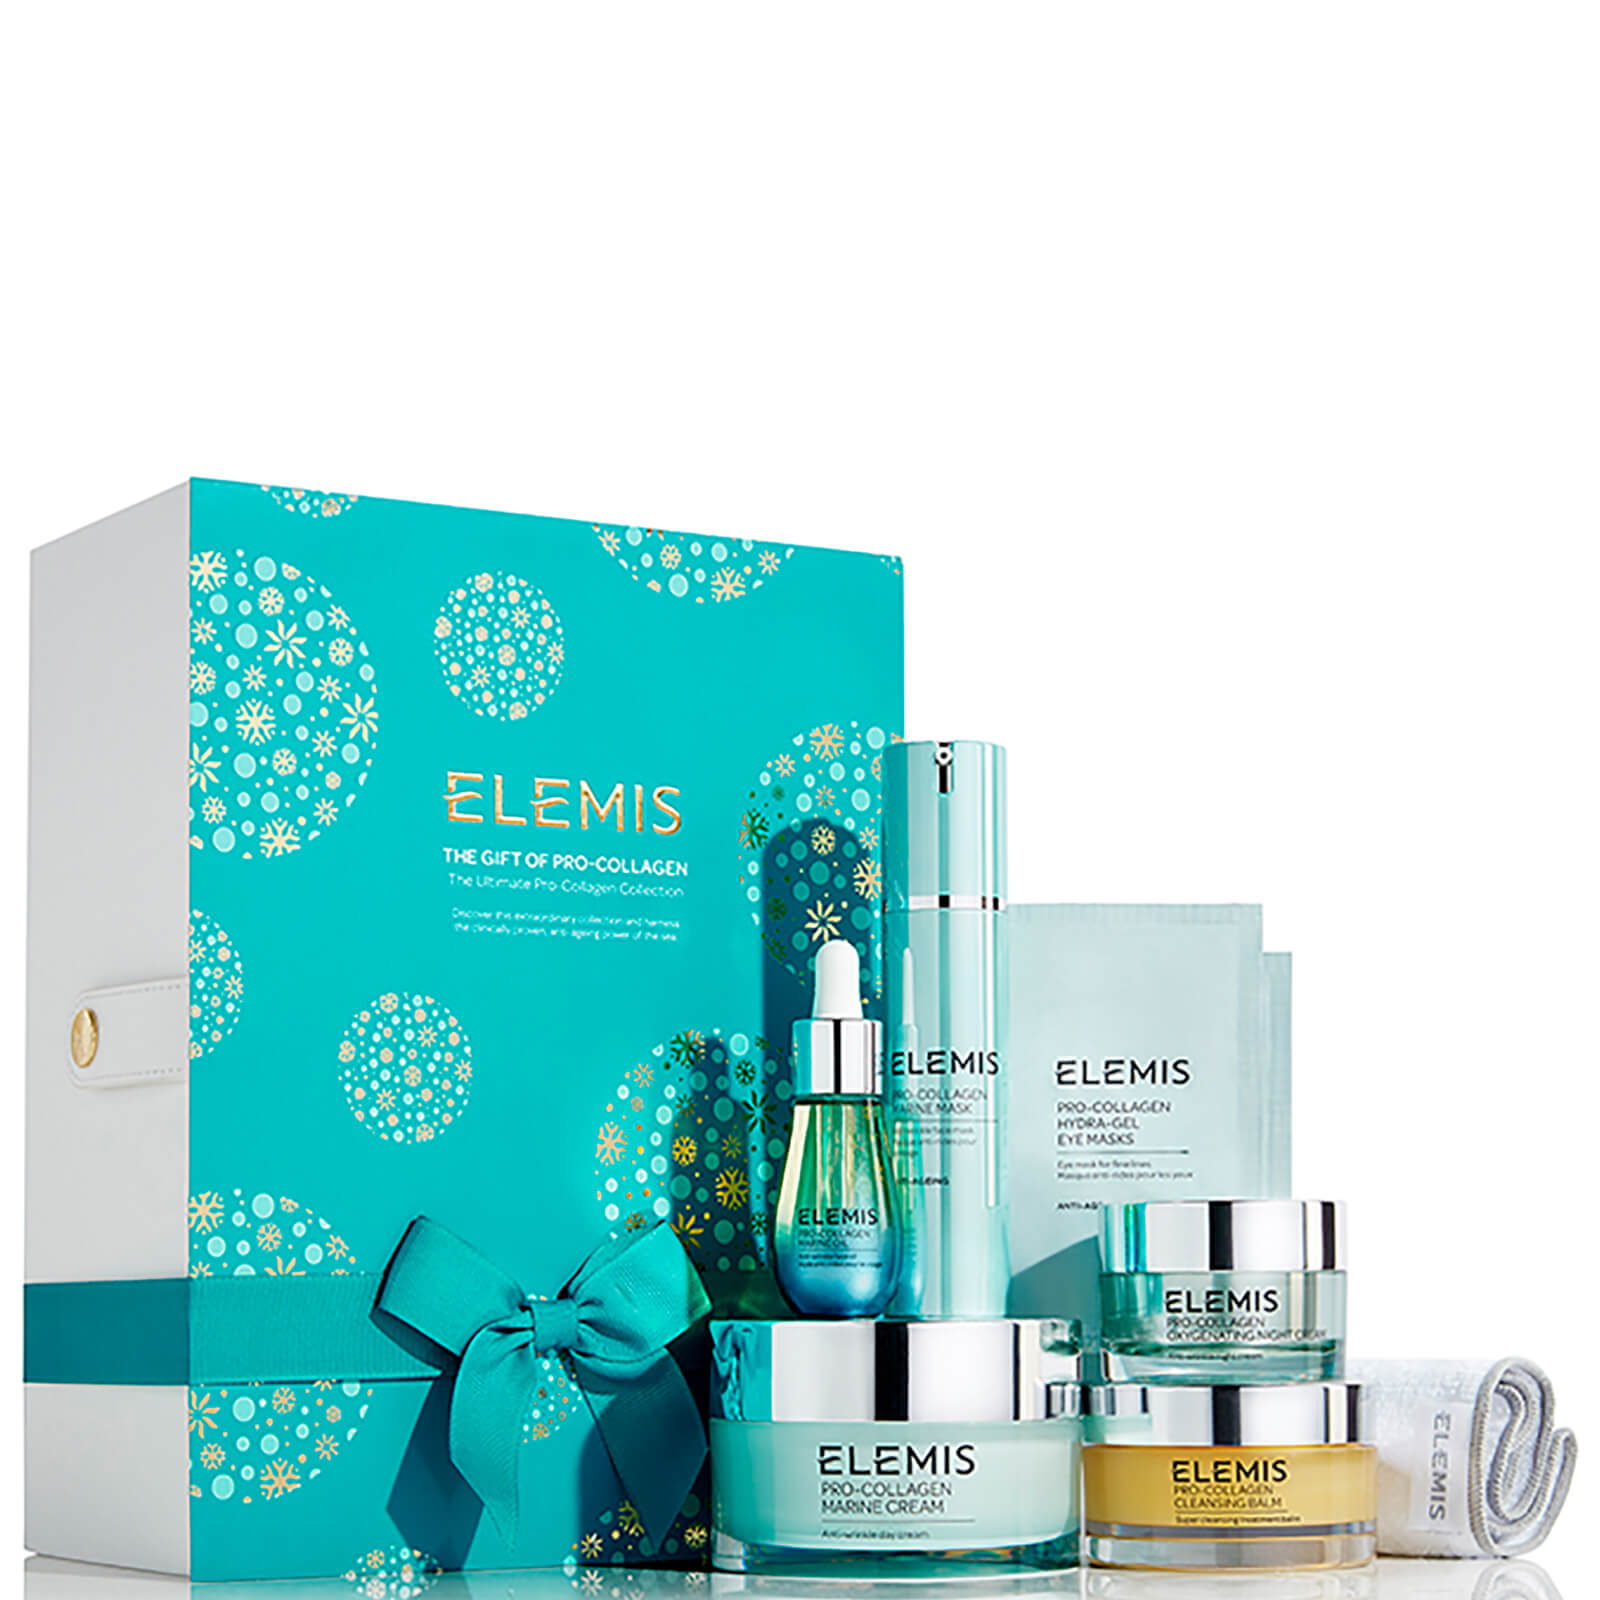 Elemis The Gift of Pro-Collagen Gift Set